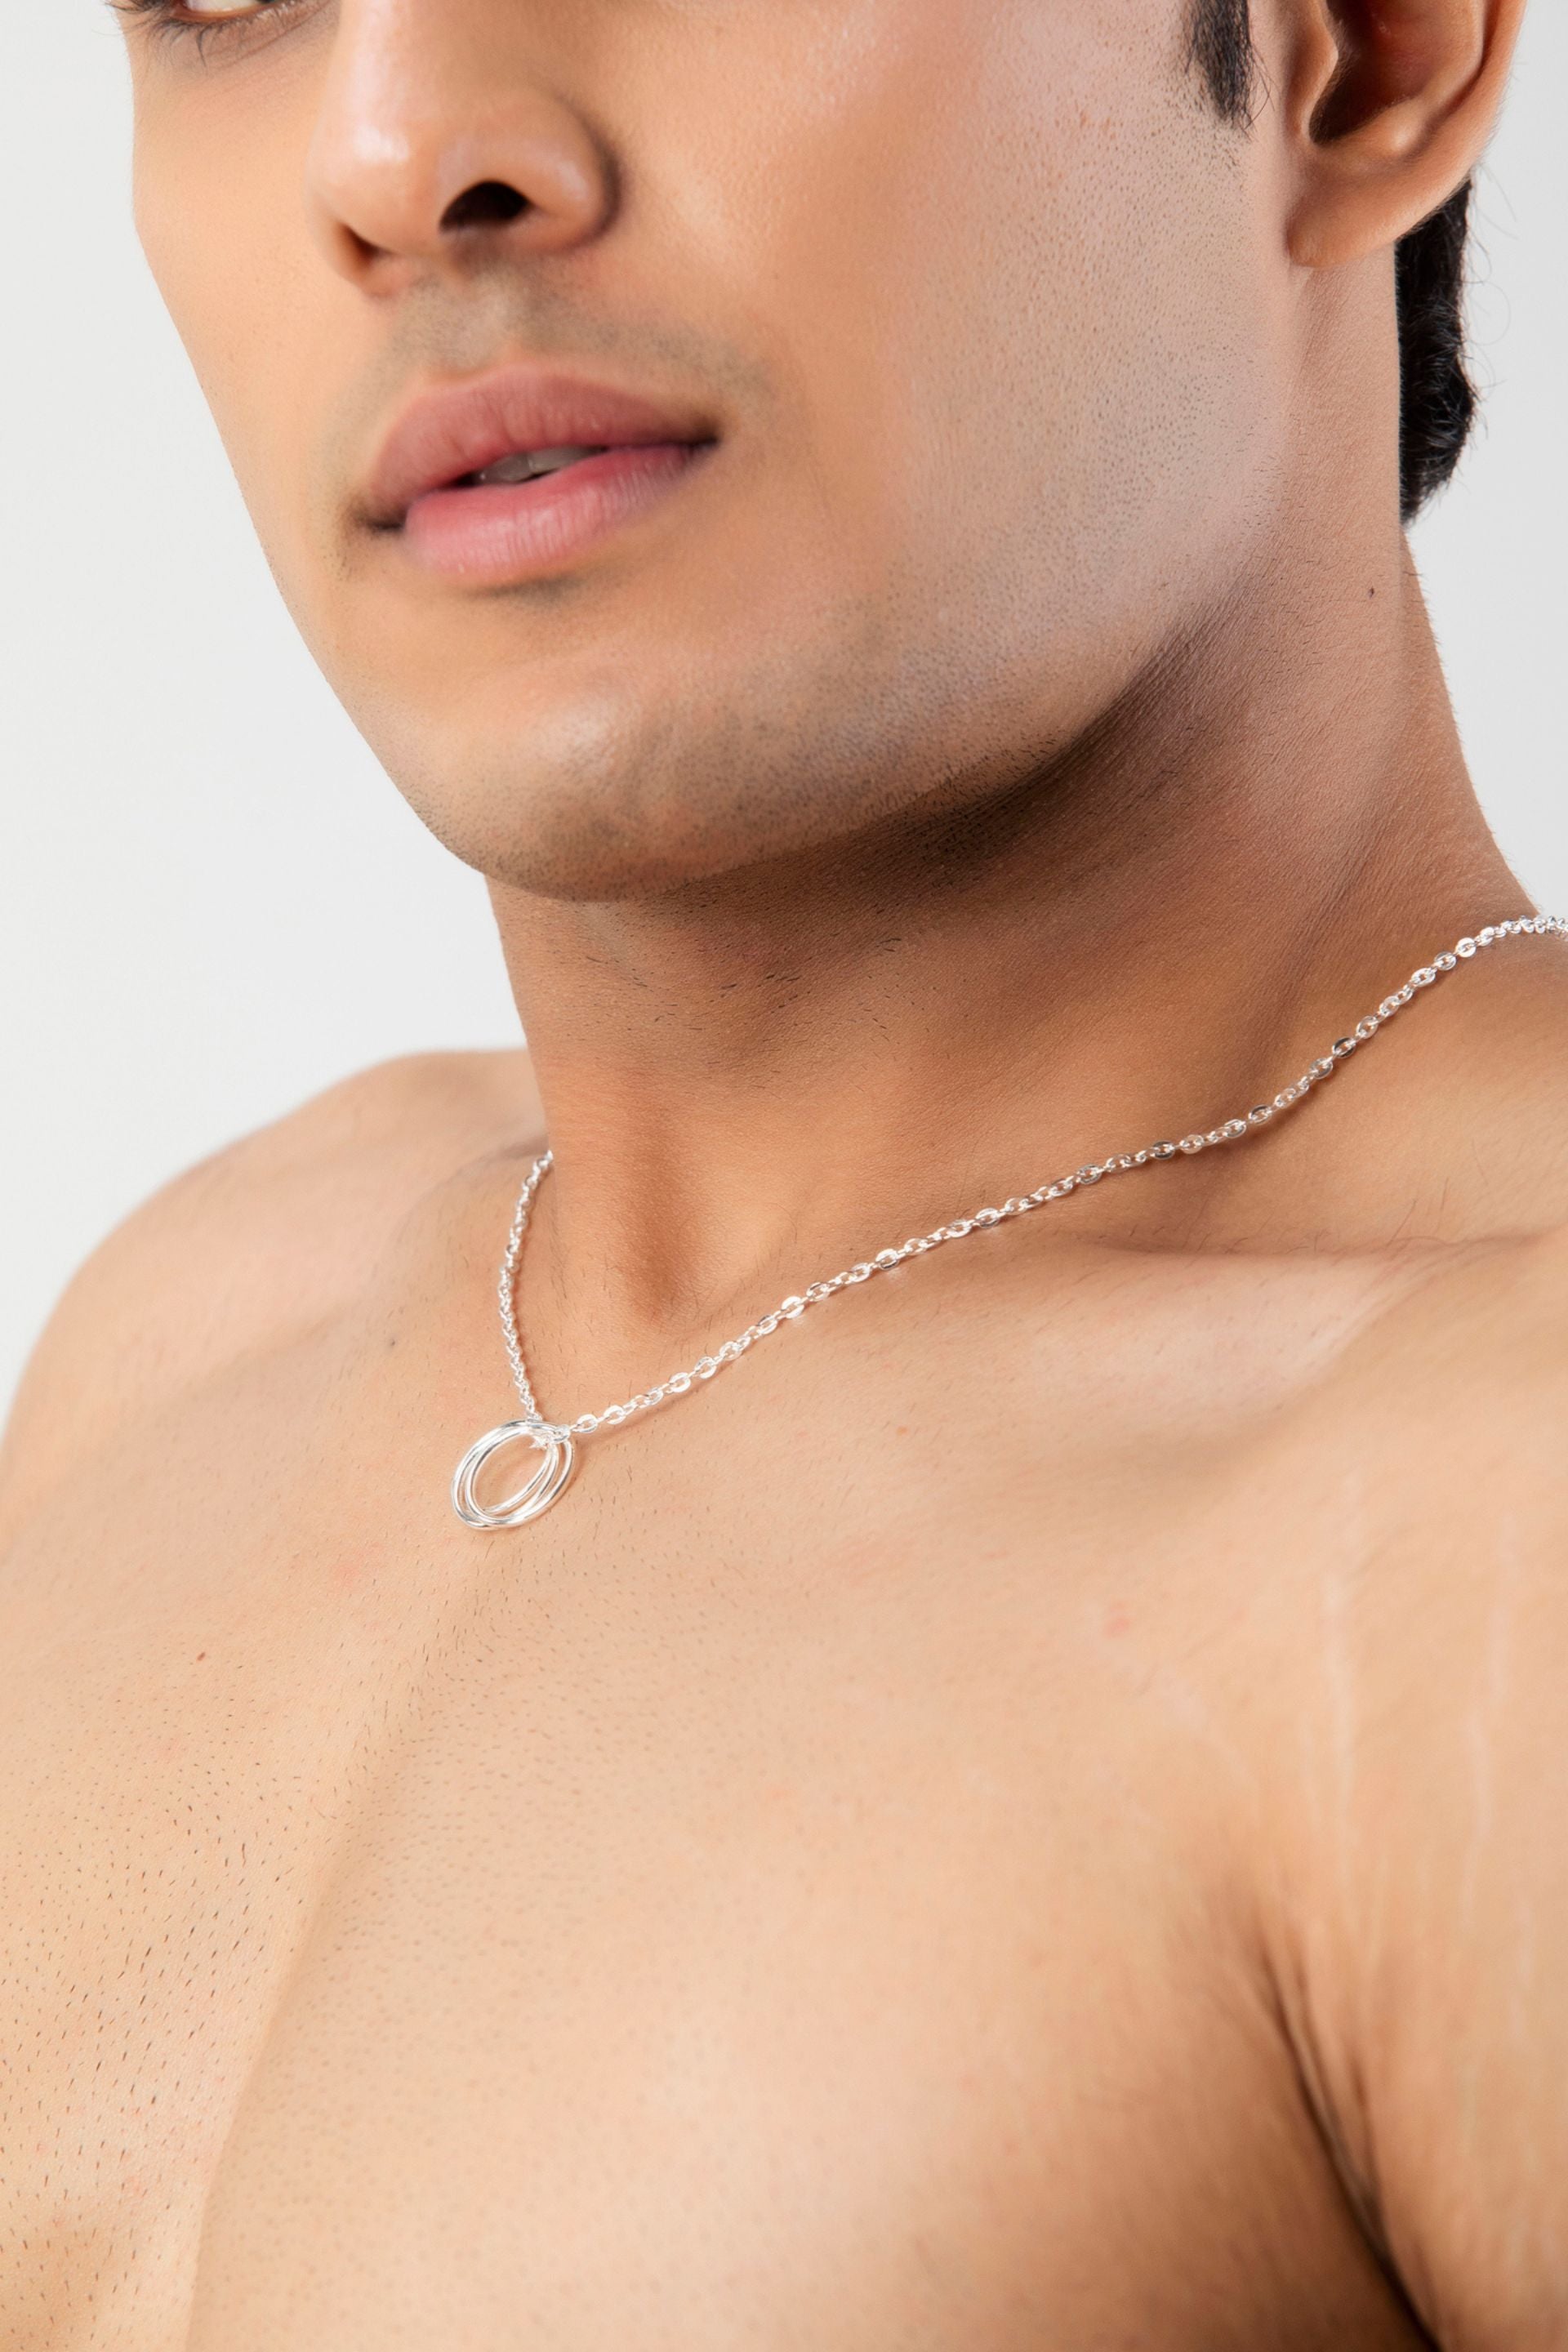 Firangi Yarn Classic Silver 3 Rings Pendant Simple Link Chain Necklace For Him